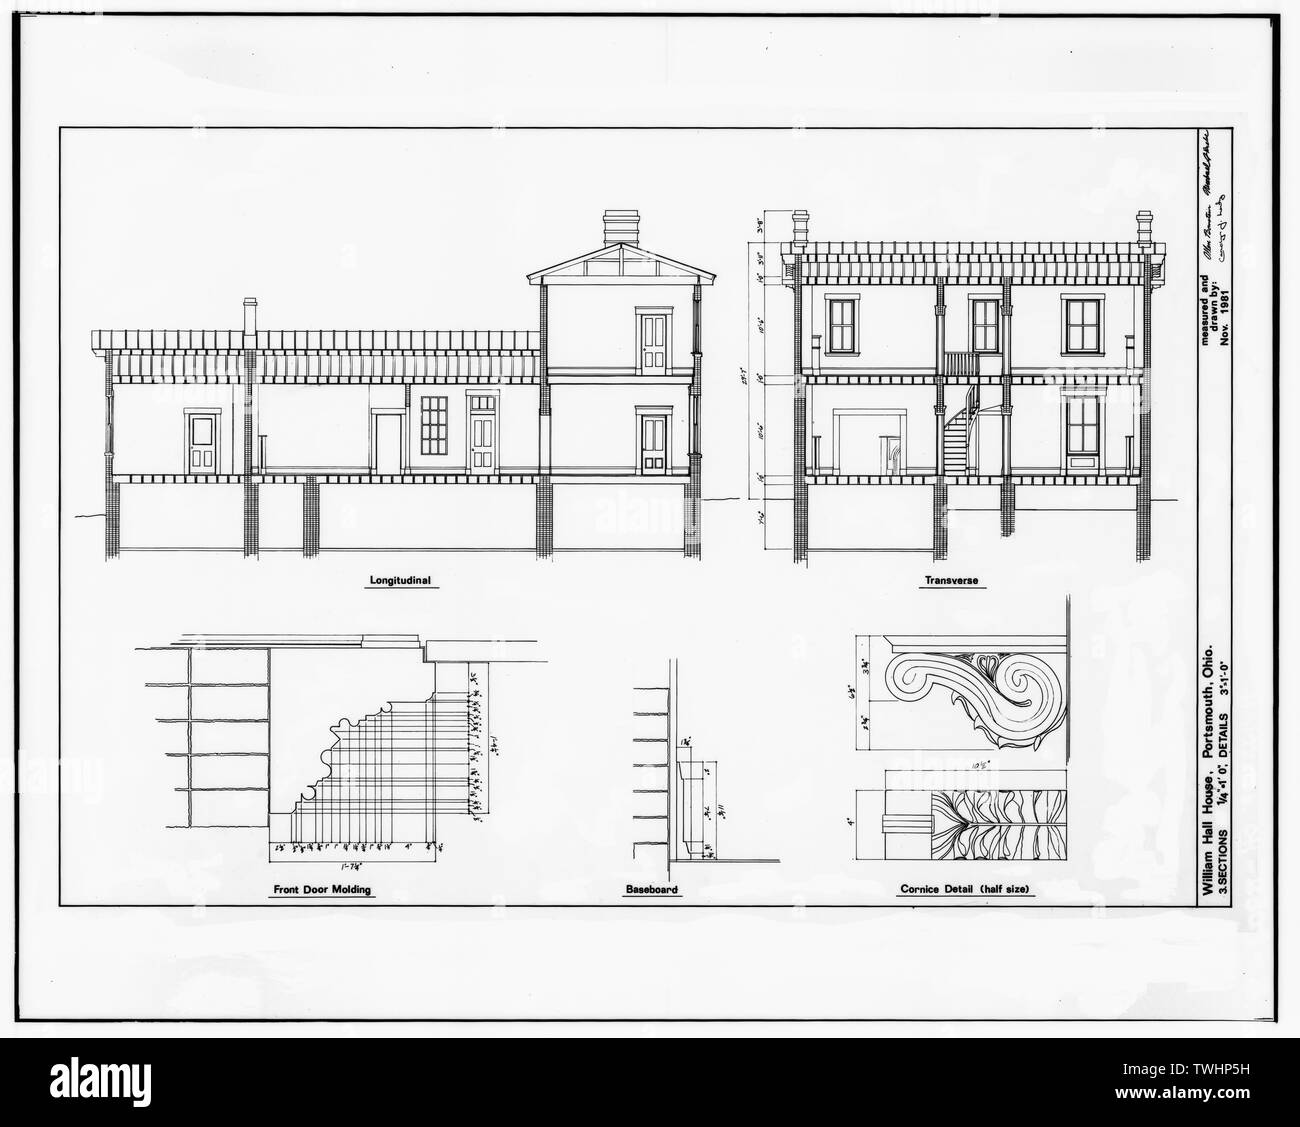 SECTIONS- LONGITUDINAL, TRANSVERSE, FRONT DOOR MOLDING, BASEBOARD, AND HALF-SIZE CORNICE DETAIL - William Hall House, 429 Second Street, Portsmouth, Scioto County, OH Stock Photo